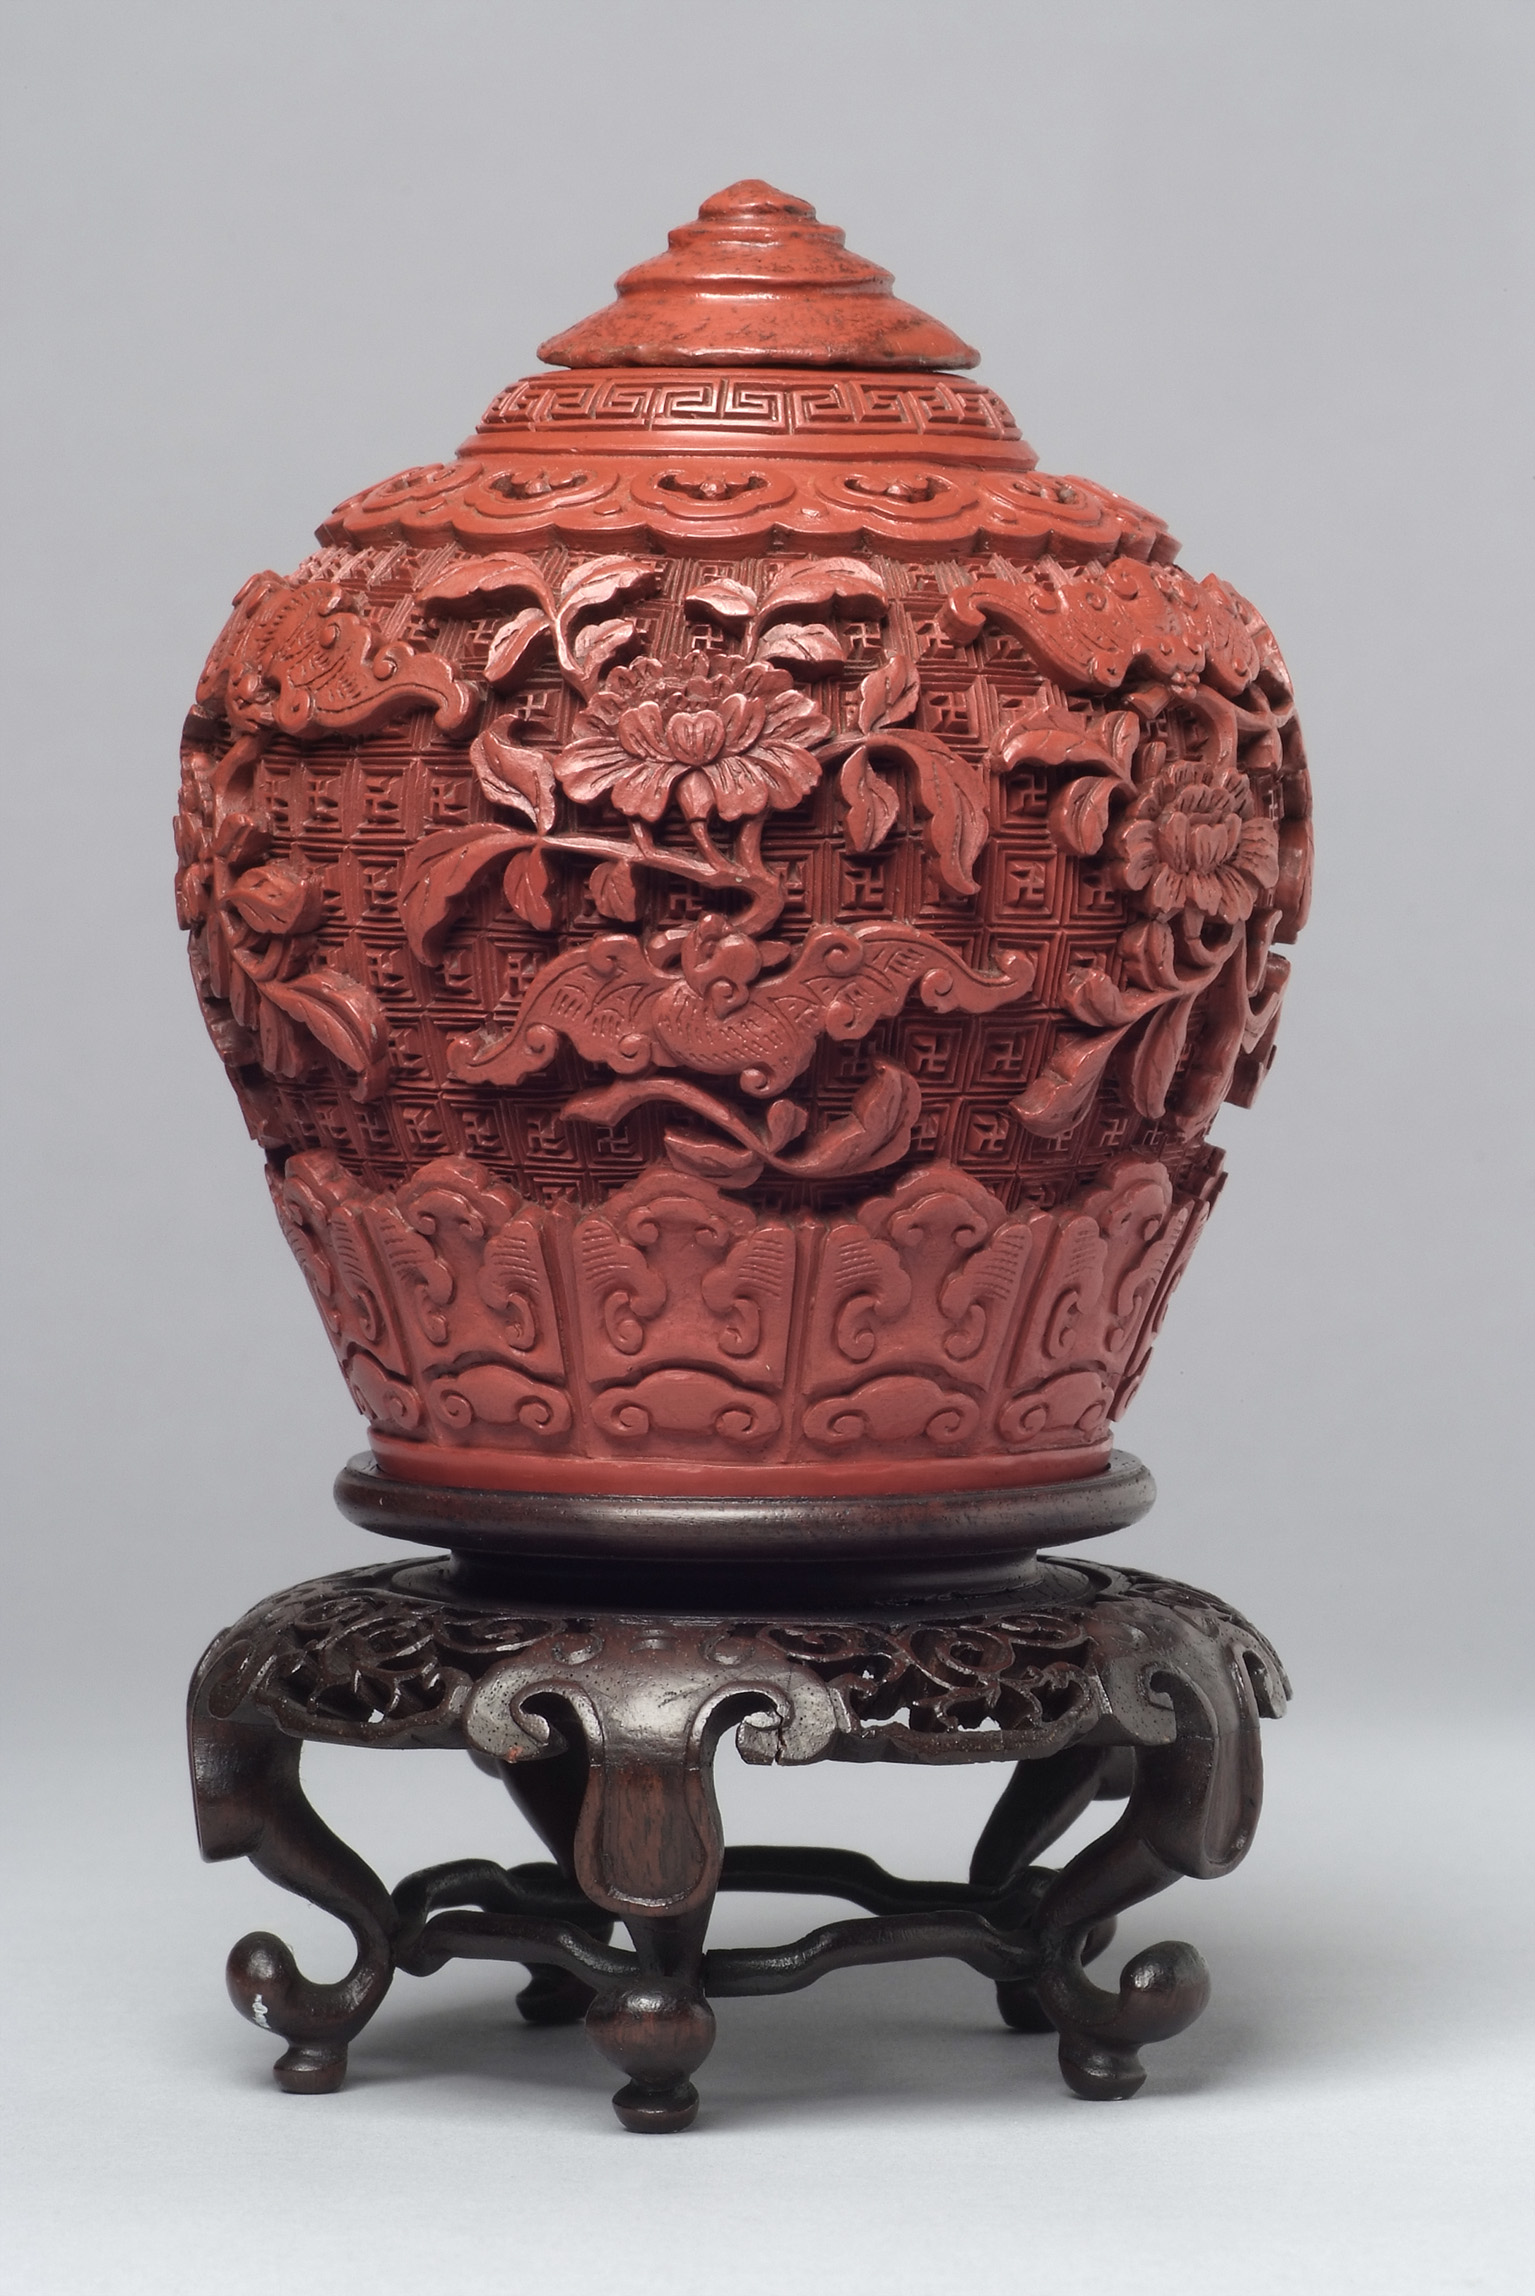 Chinese Carved Cinnabar Lacquer Jar and Cover on Stand. Qing Dynasty, 18th-19th Century. James Cromar Watt bequest, 1941. © Aberdeen City Council (Art Gallery and Museums Collections)